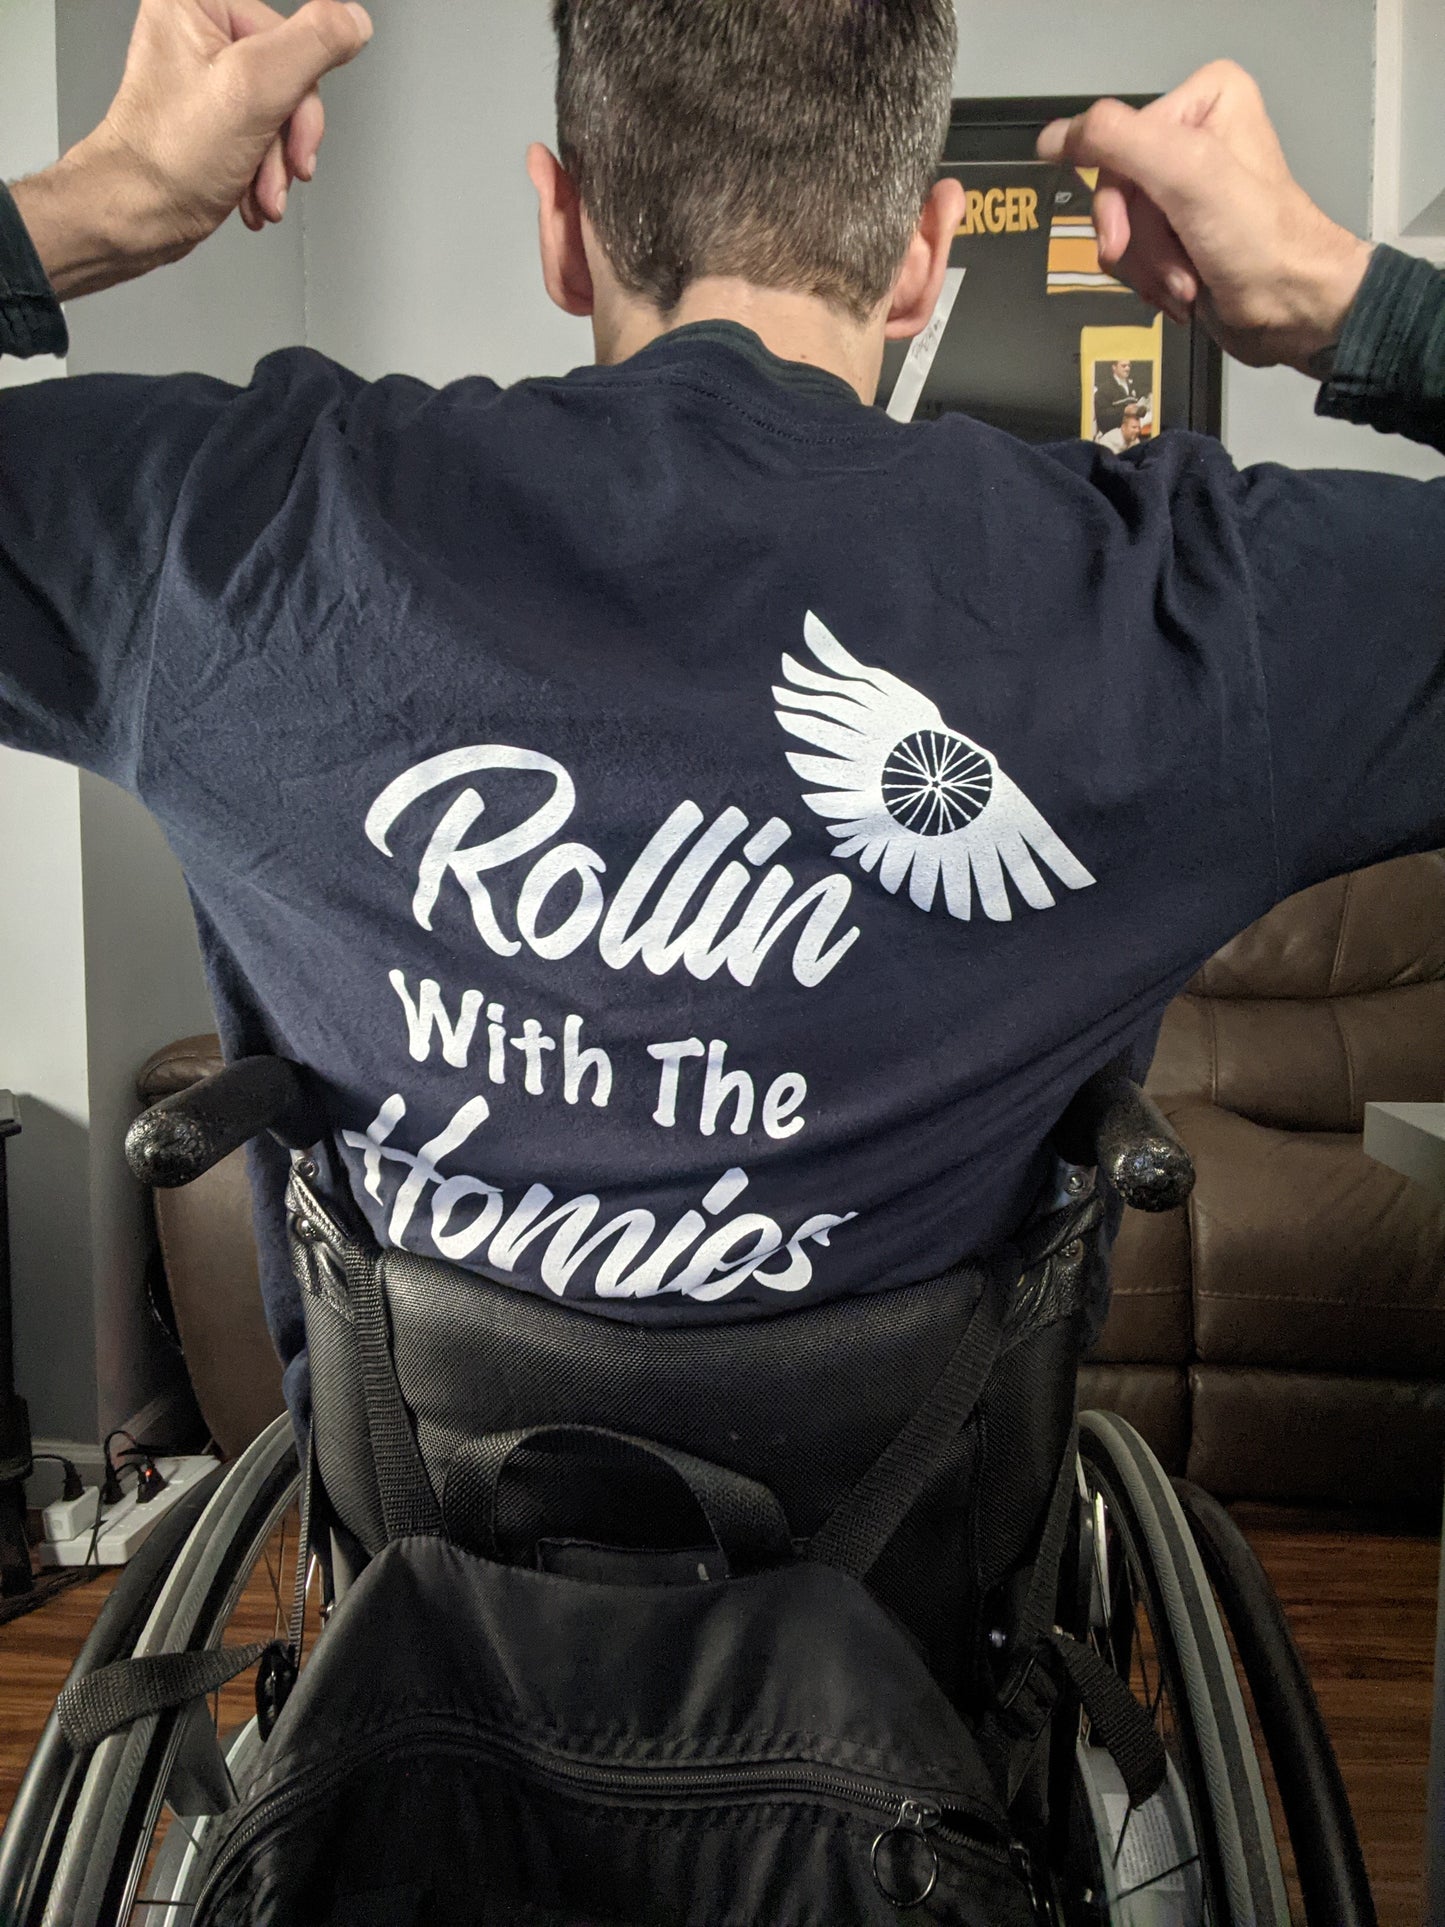 Rollin with the Homies T-shirt